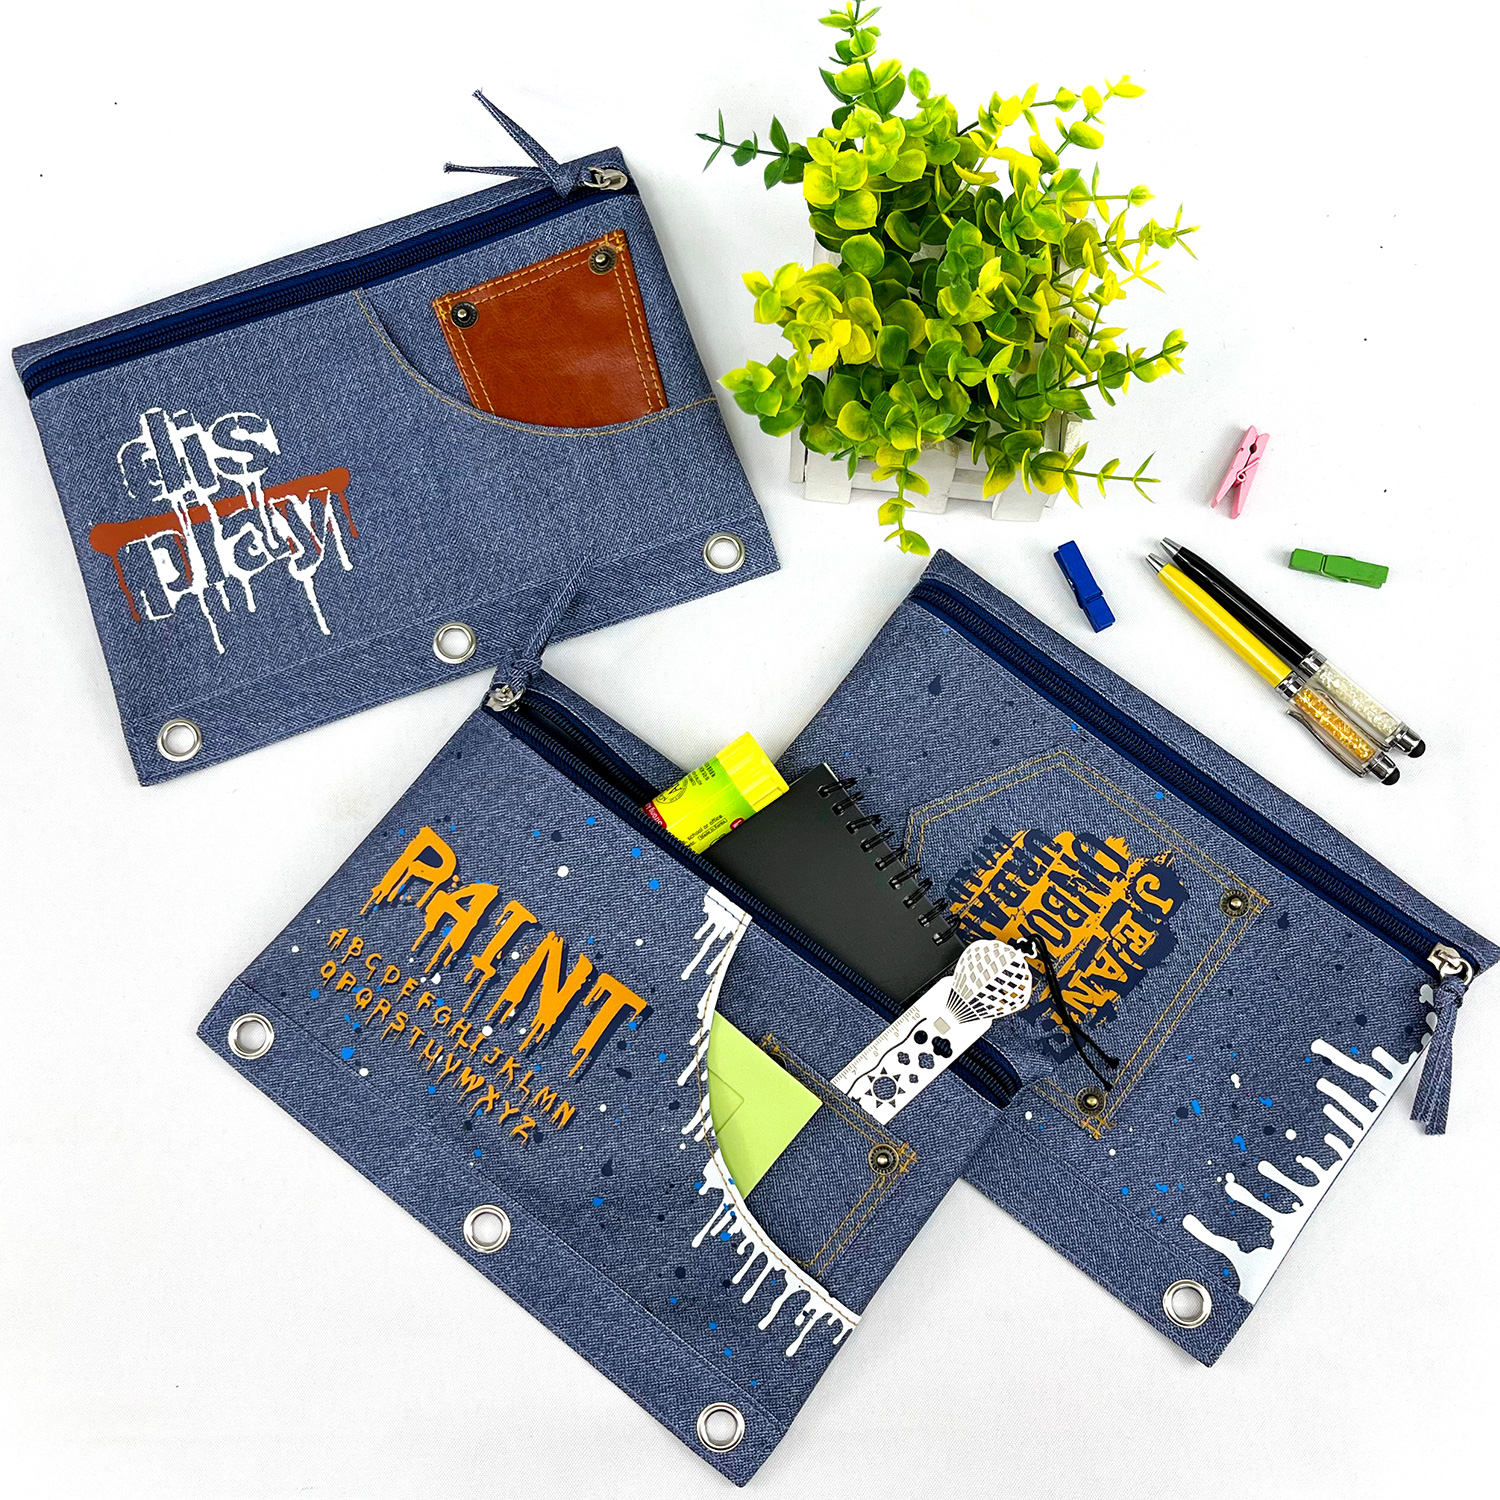 Trending Products Mini Travel Case - Graffiti painting blue denim polyester binder pouch pencil bag with double pocket with zipper closure with 3-round rings 3 colors available great gift for kids...